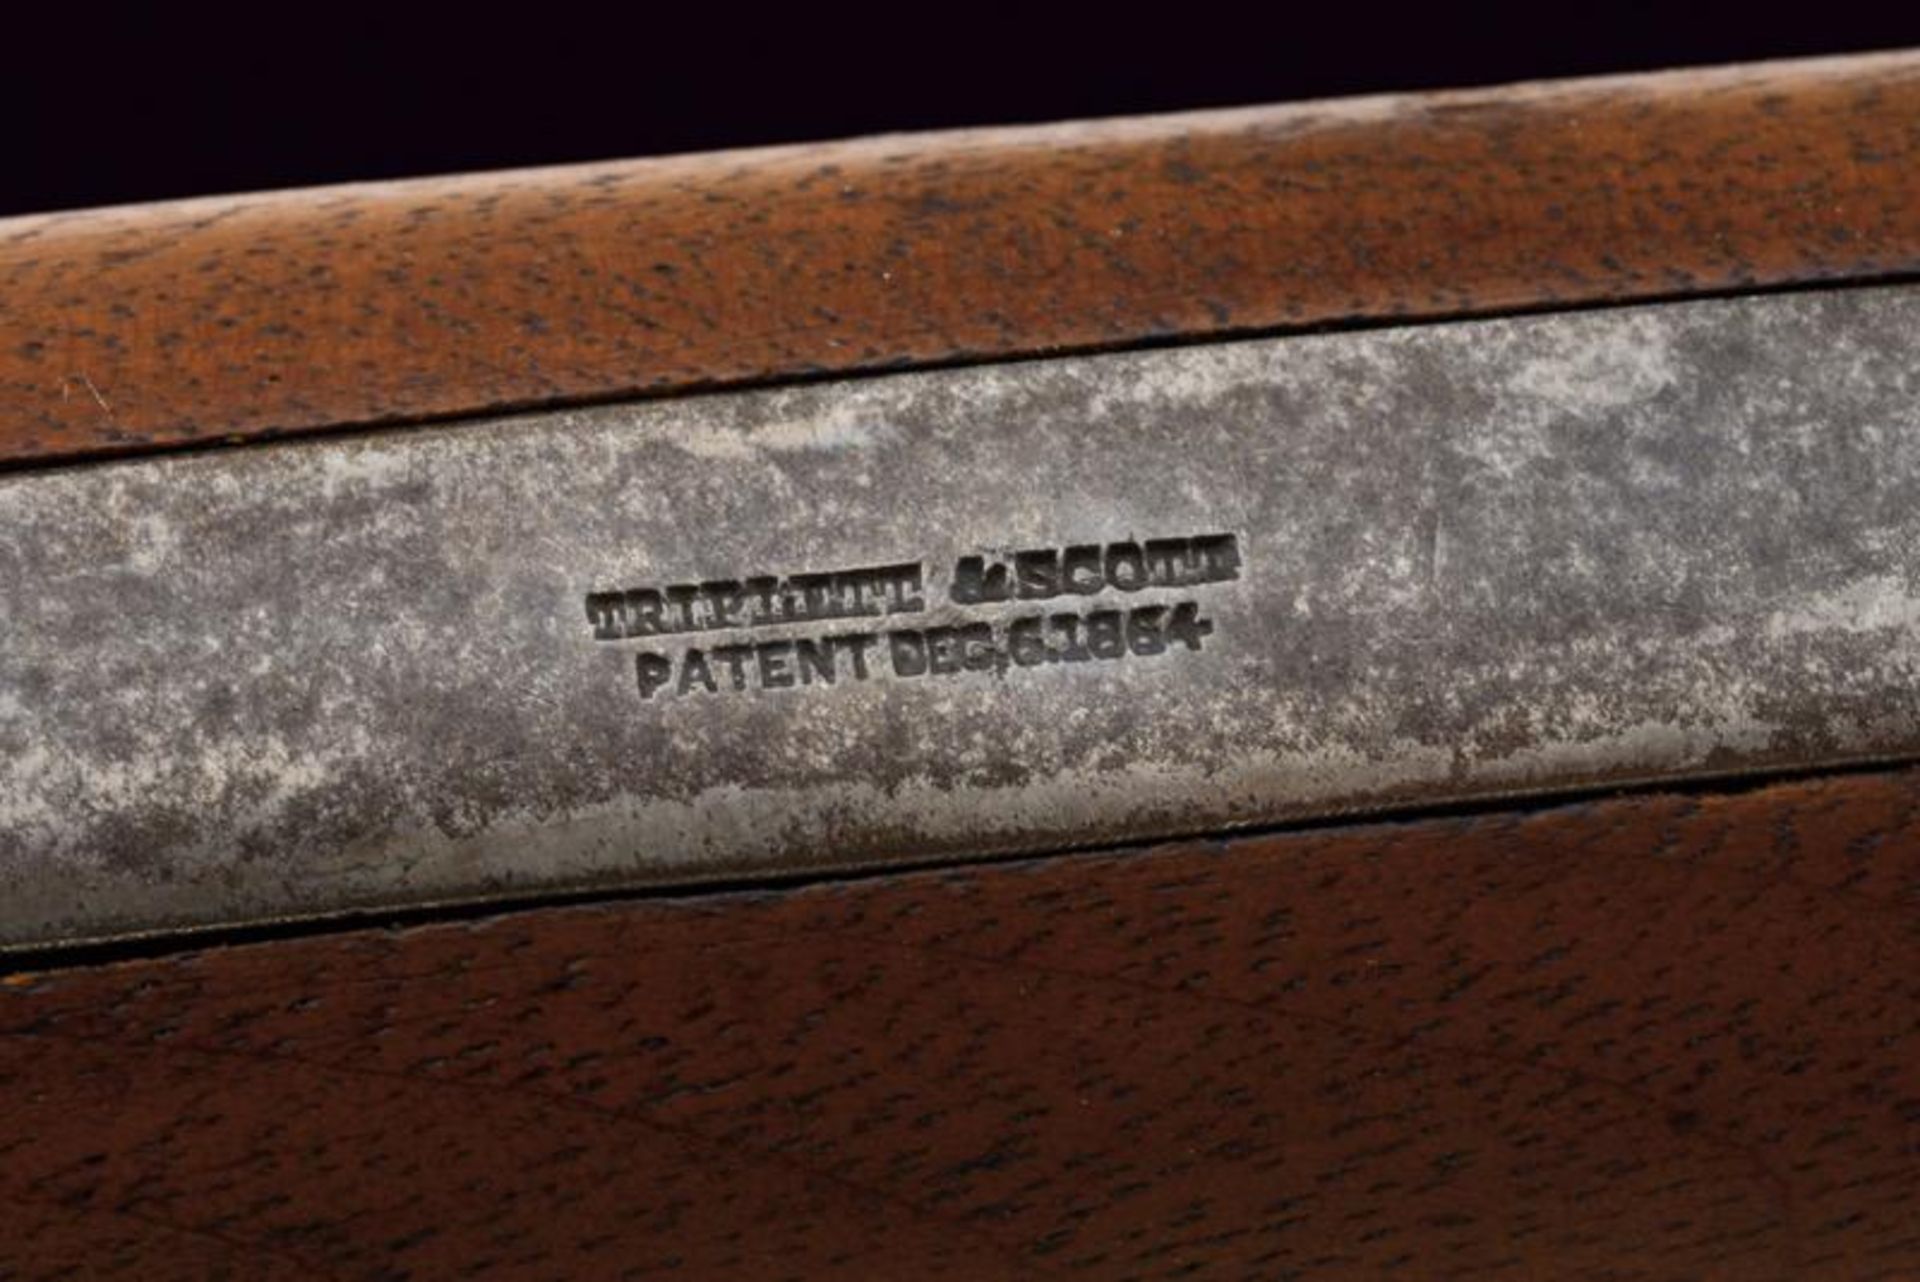 A rare Triplett & Scott Repeating Carbine by Meriden - Image 9 of 11